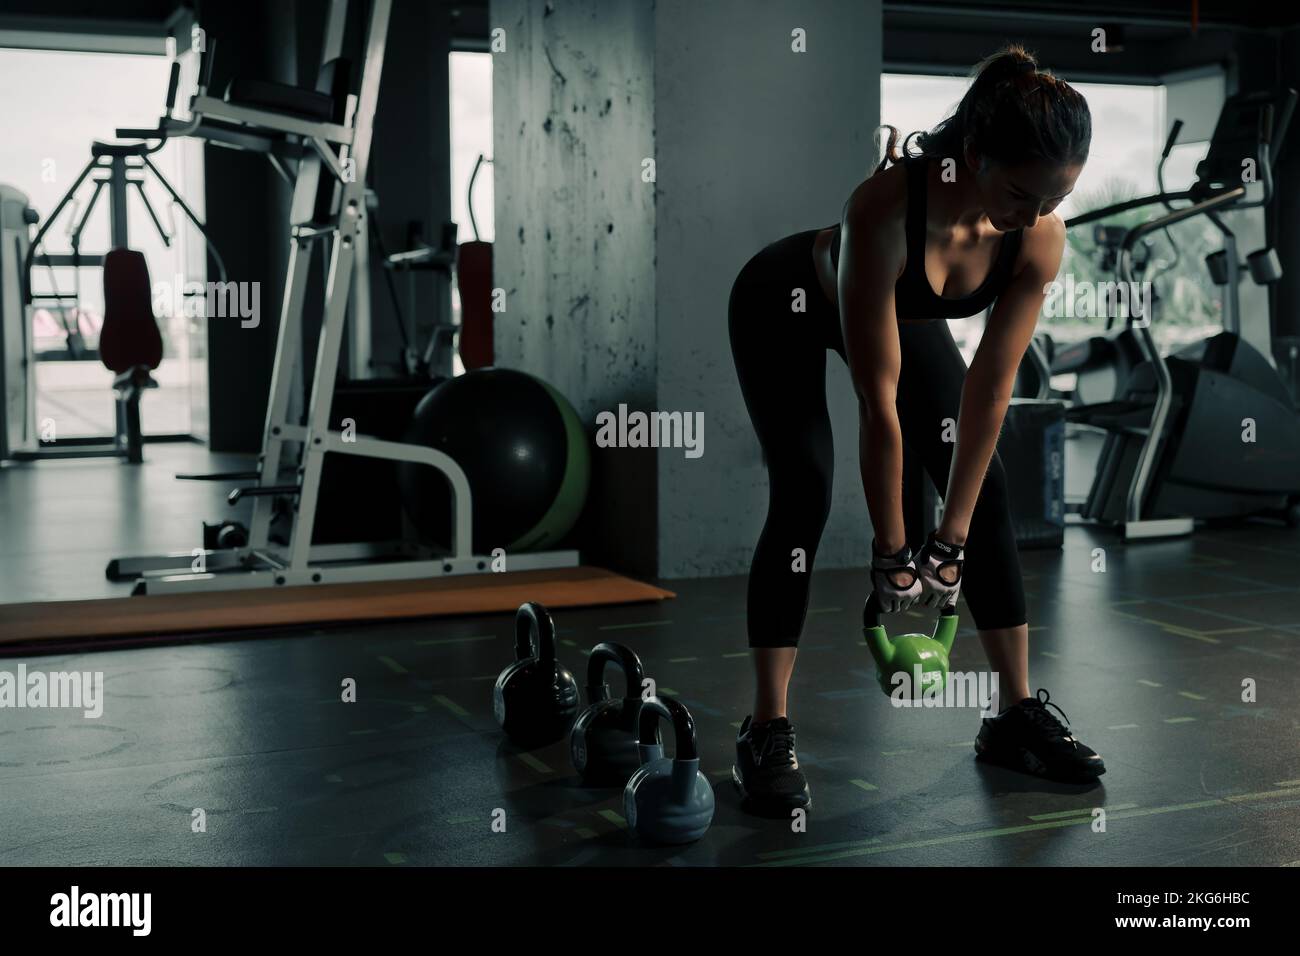 Young woman lifts single kettlebell in upper arm exercise to build muscle. Stock Photo